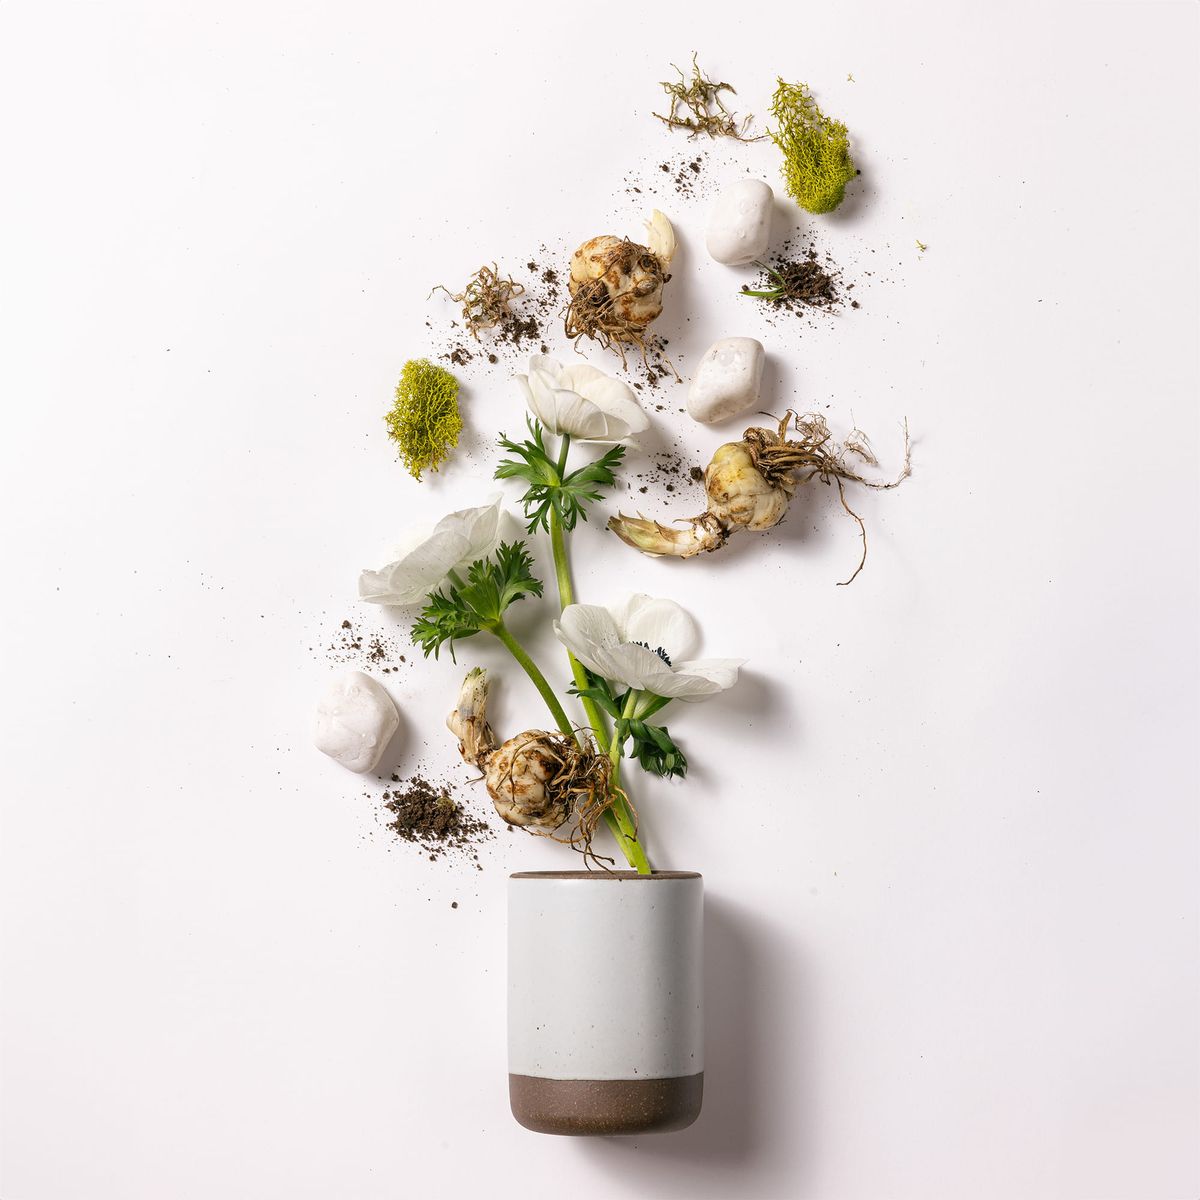 A cylindrical ceramic vessel in an cool white color laying on its side - anemone and moss are artfully styled coming out of the top of the candle to reflect the scent.